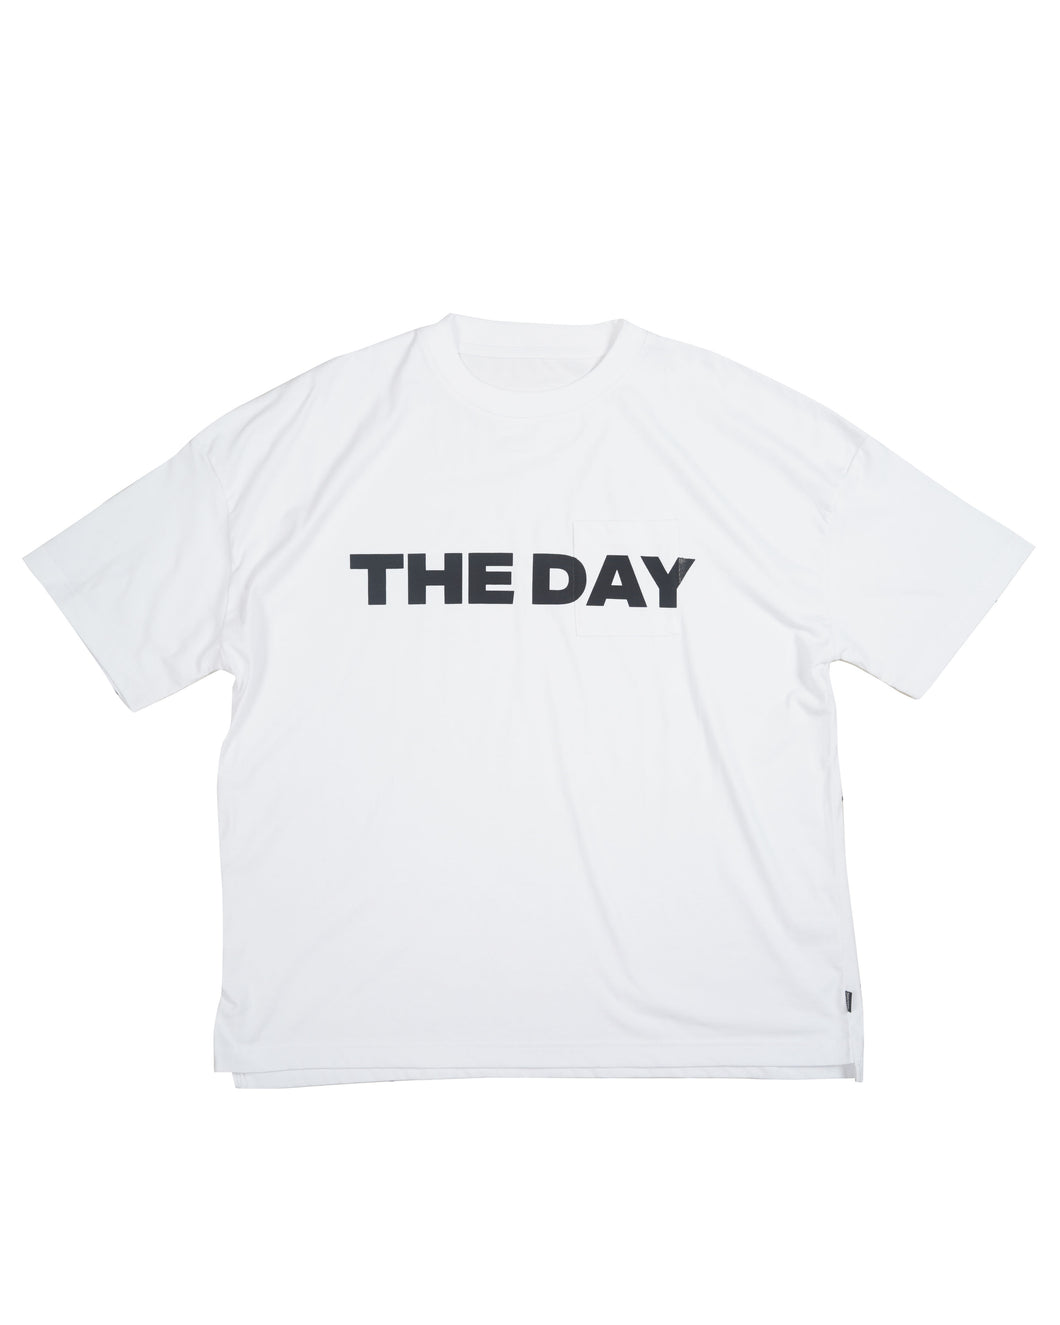 SHELTECHプリントTシャツ（メンズ／WHITE／THE DAY）